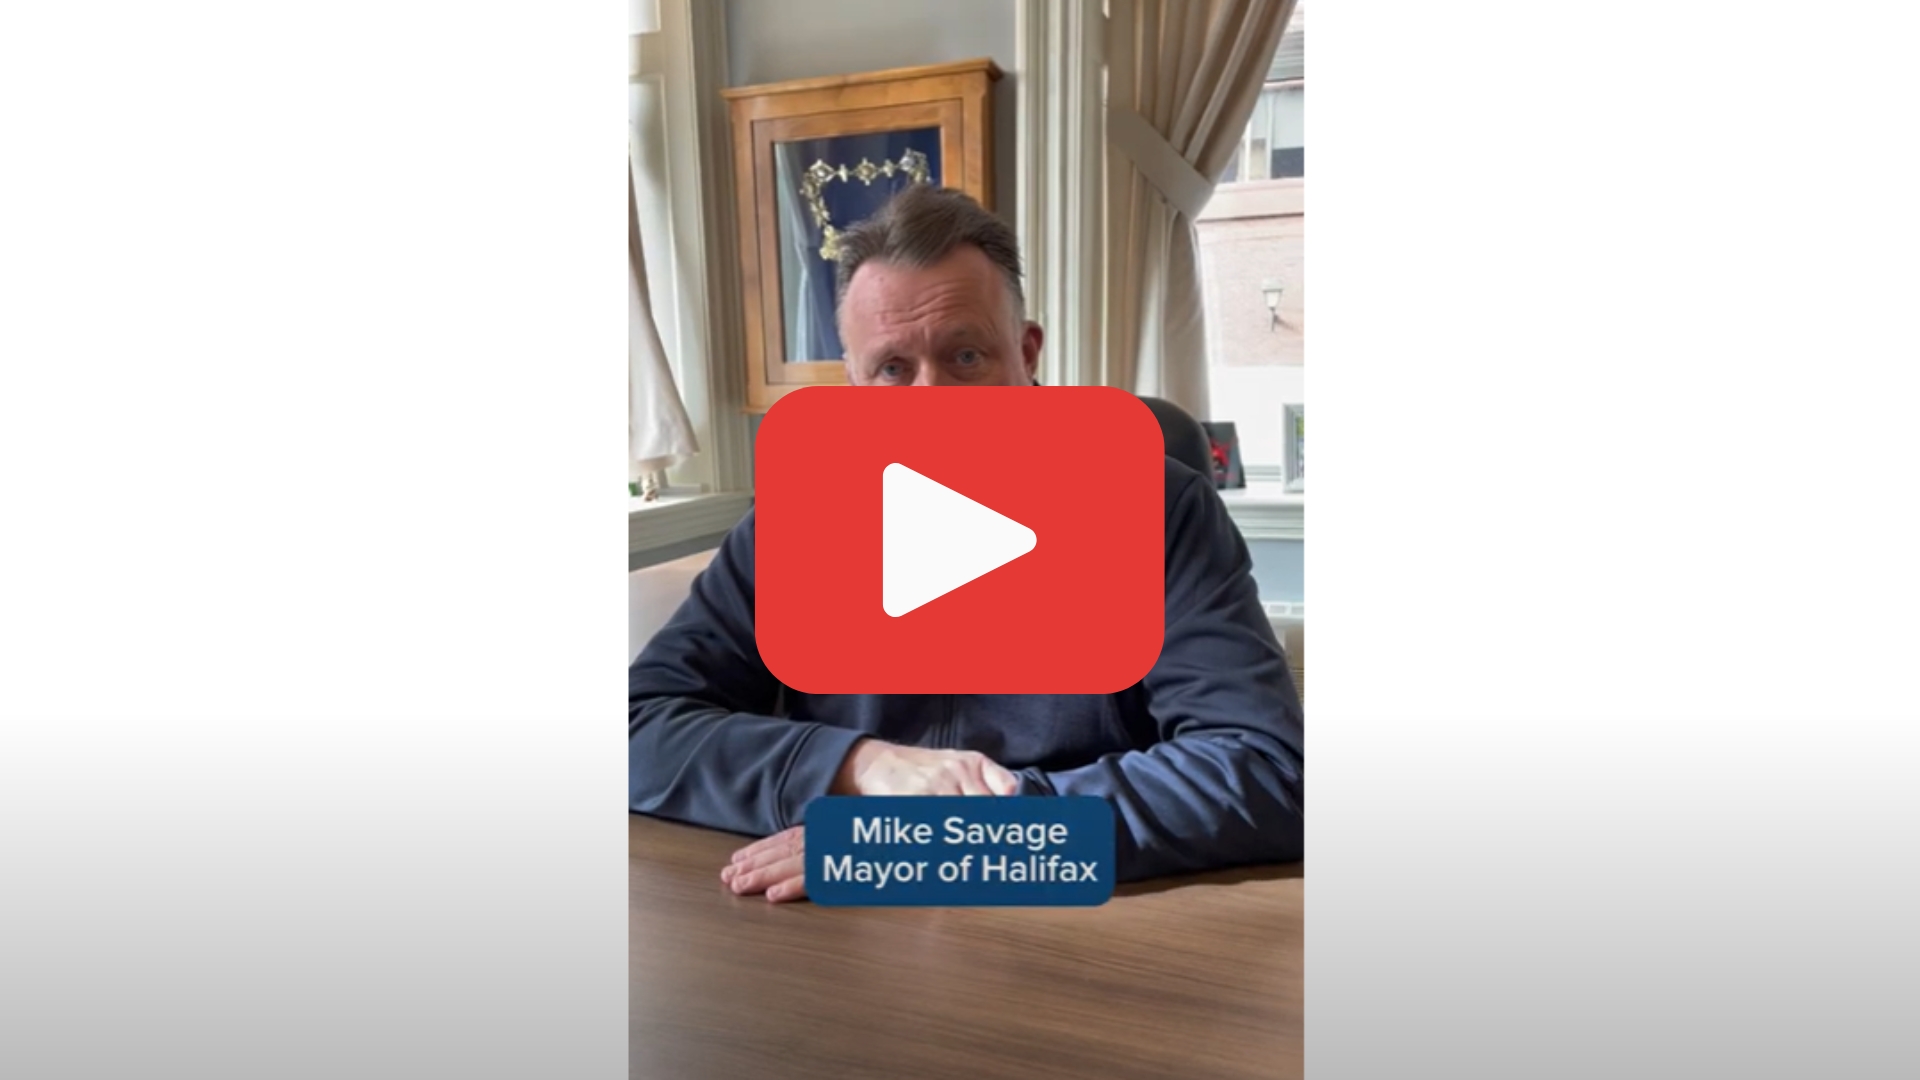 Video screenshot of Mayor Mike Savage sitting at his desk with a YouTube "play button" superimposed on him.